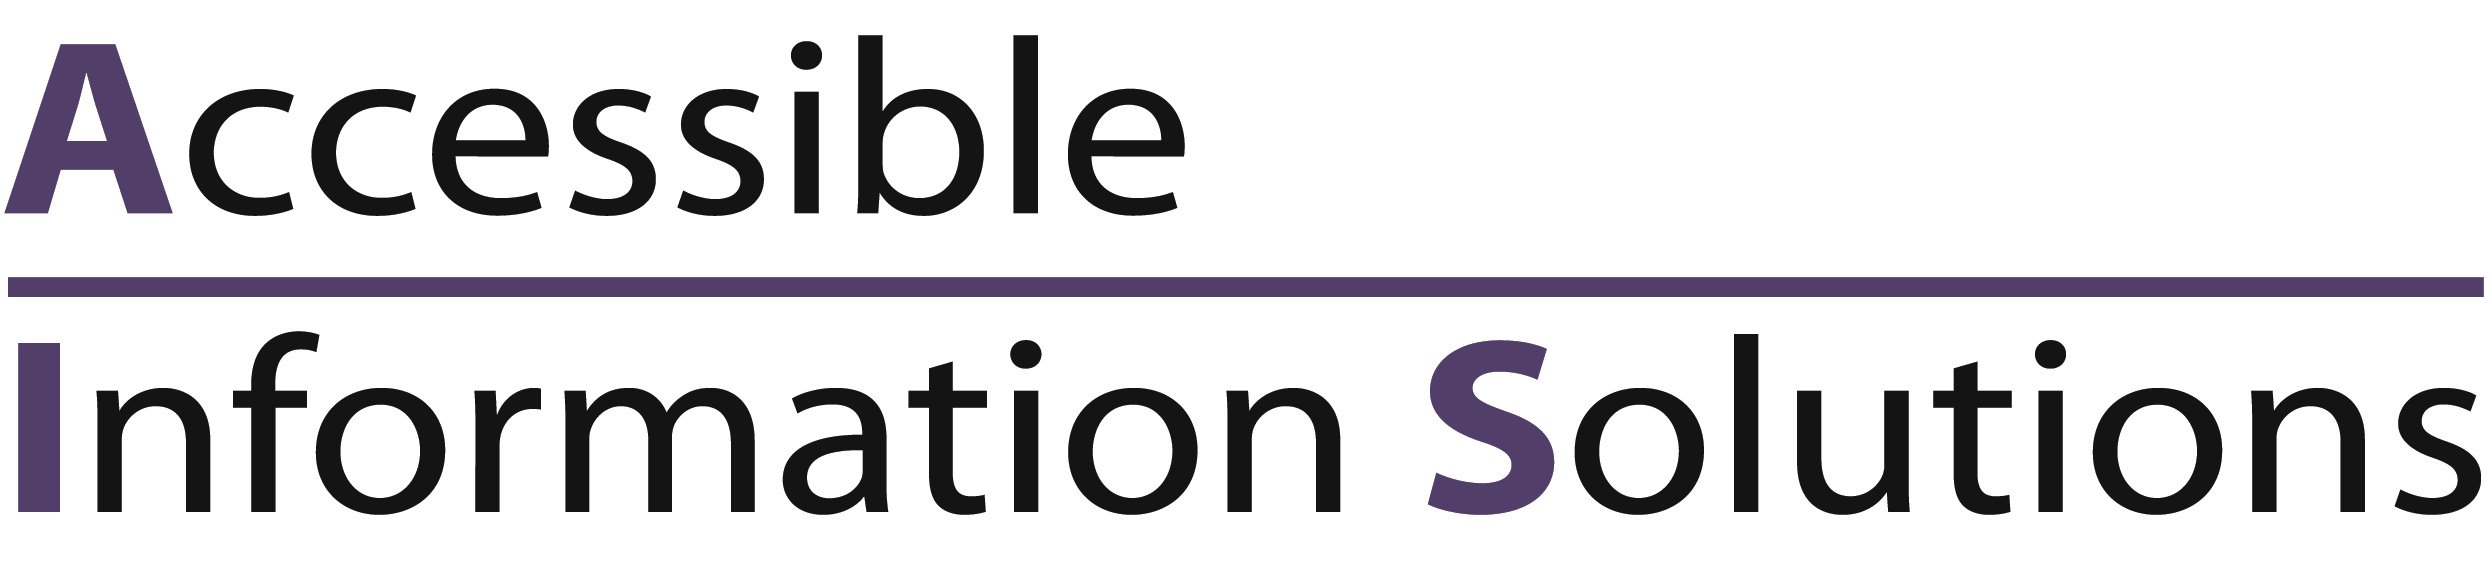 Accessible Information Systems Logo -just text